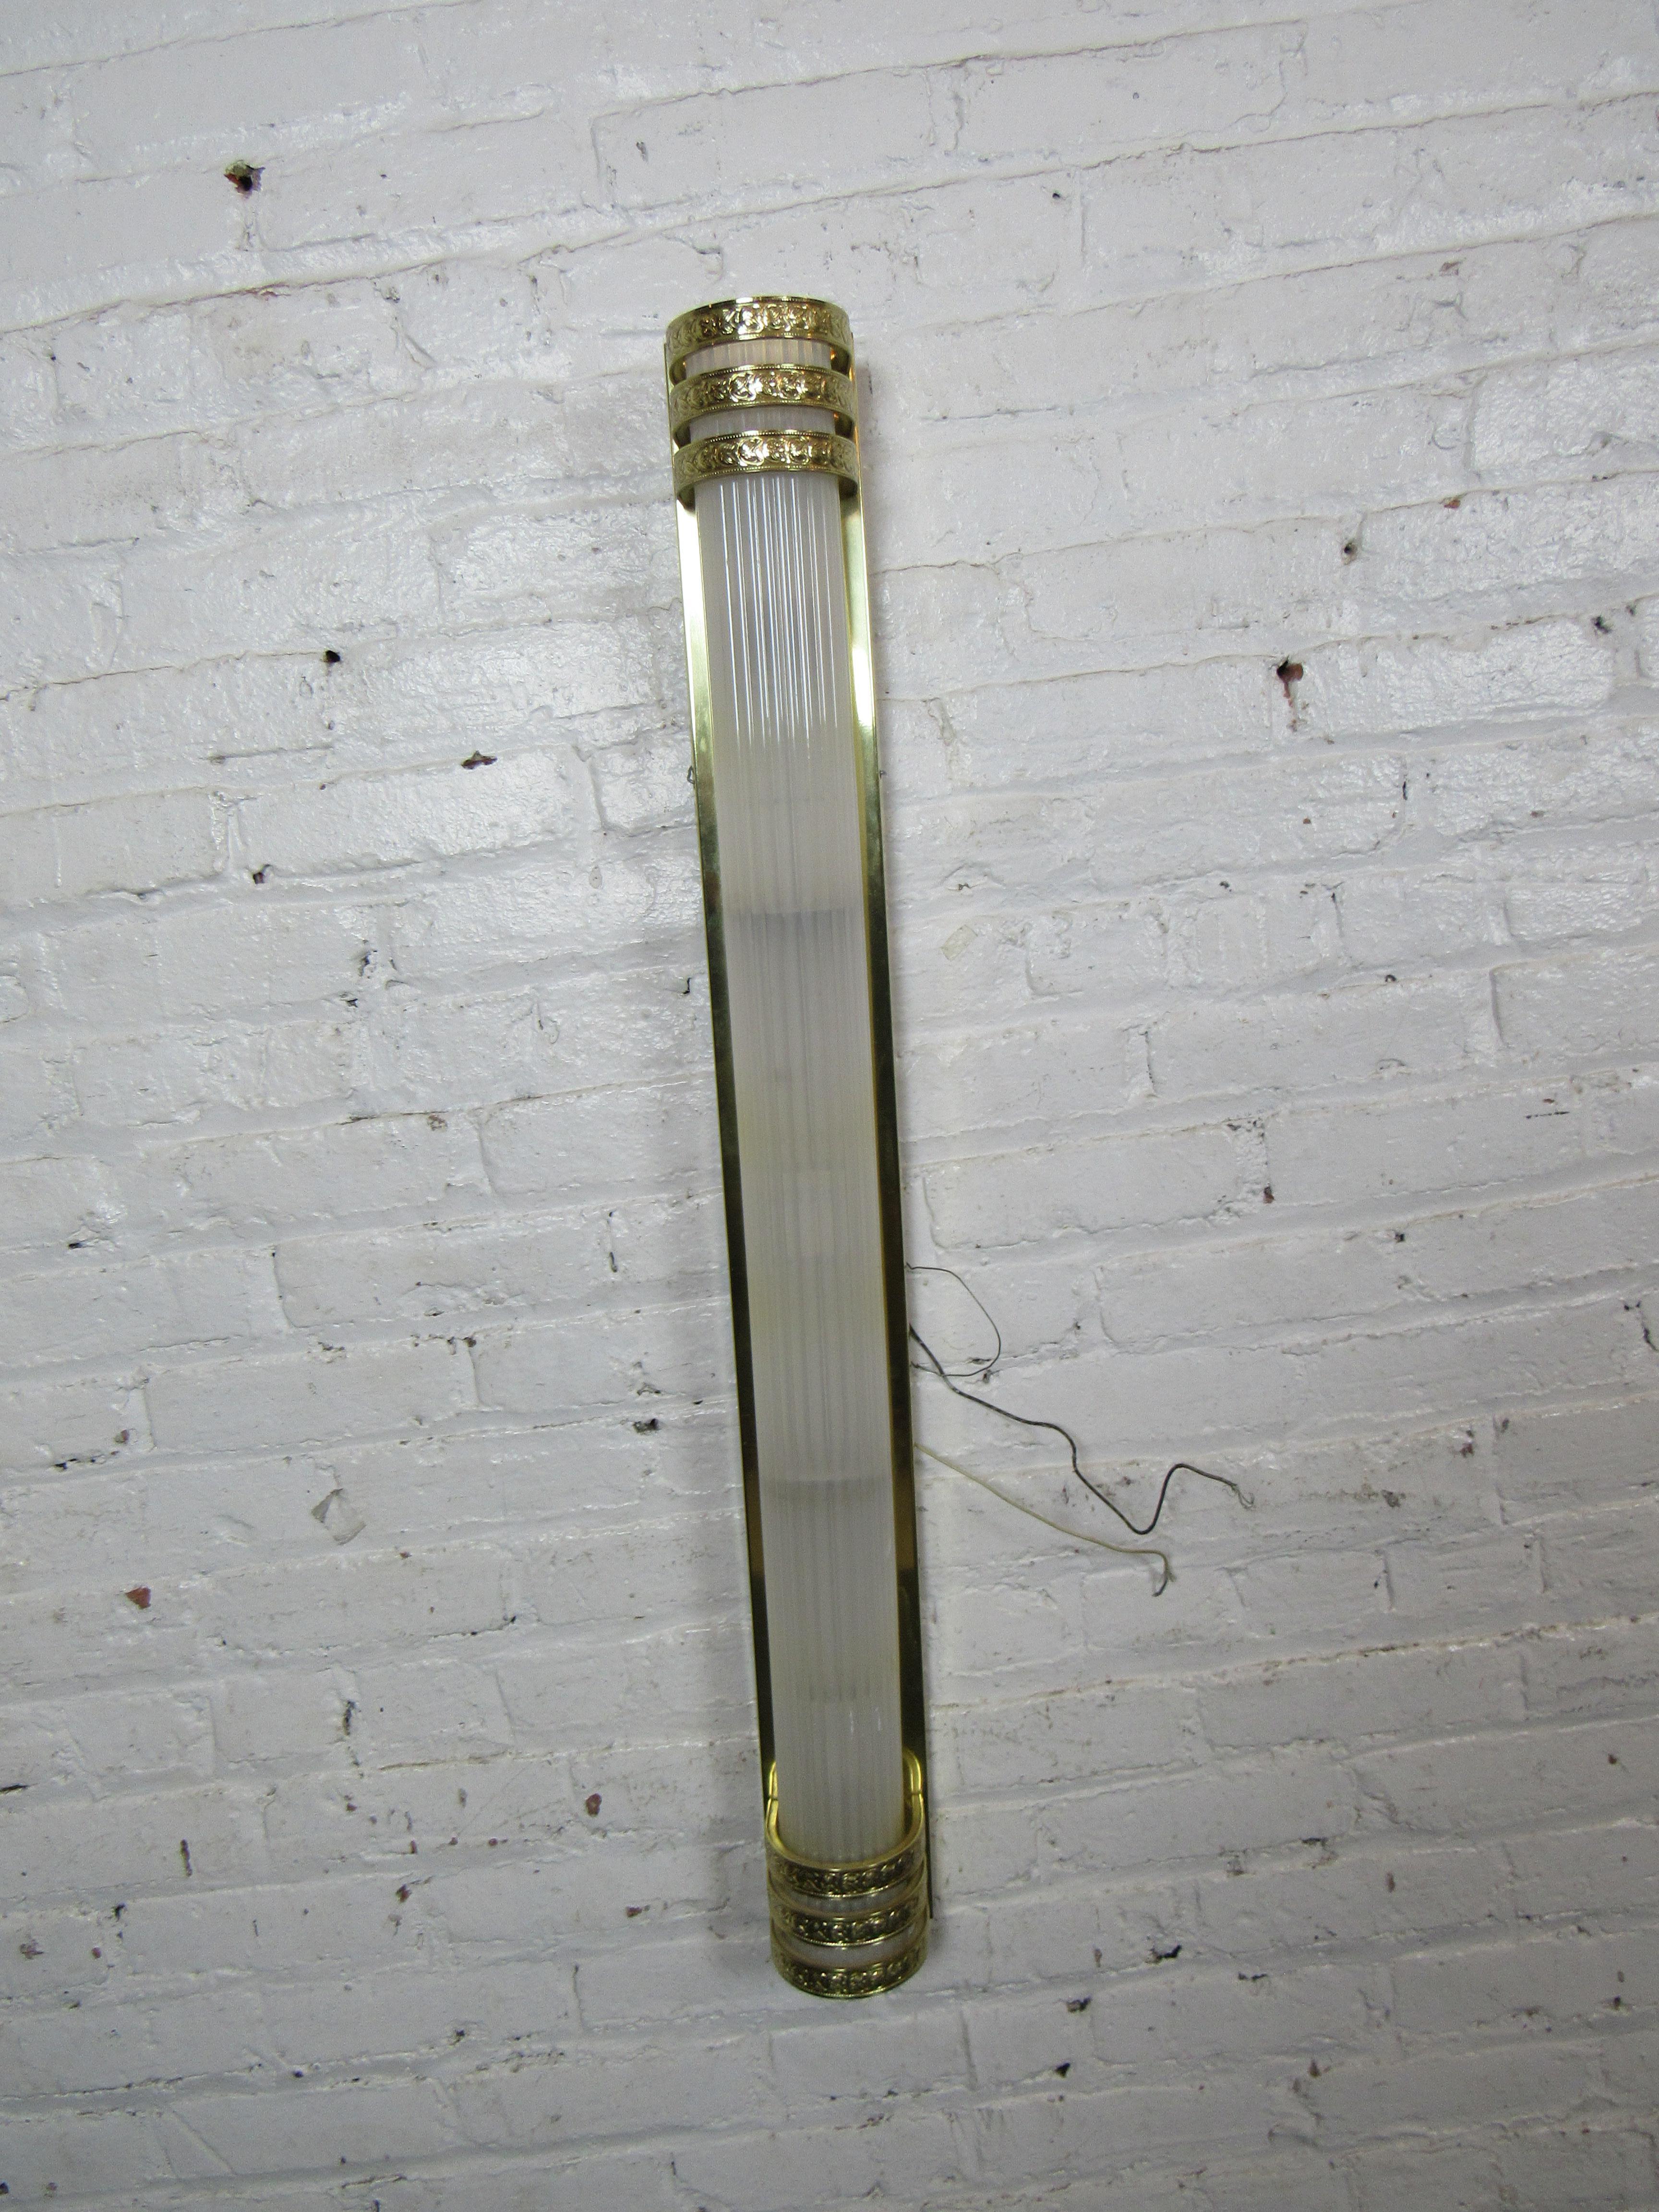 With a unique cylindrical lucite cover, these wall mounted light fixtures offer a stylish way to light any interior. Please confirm item location with seller (NY/NJ).